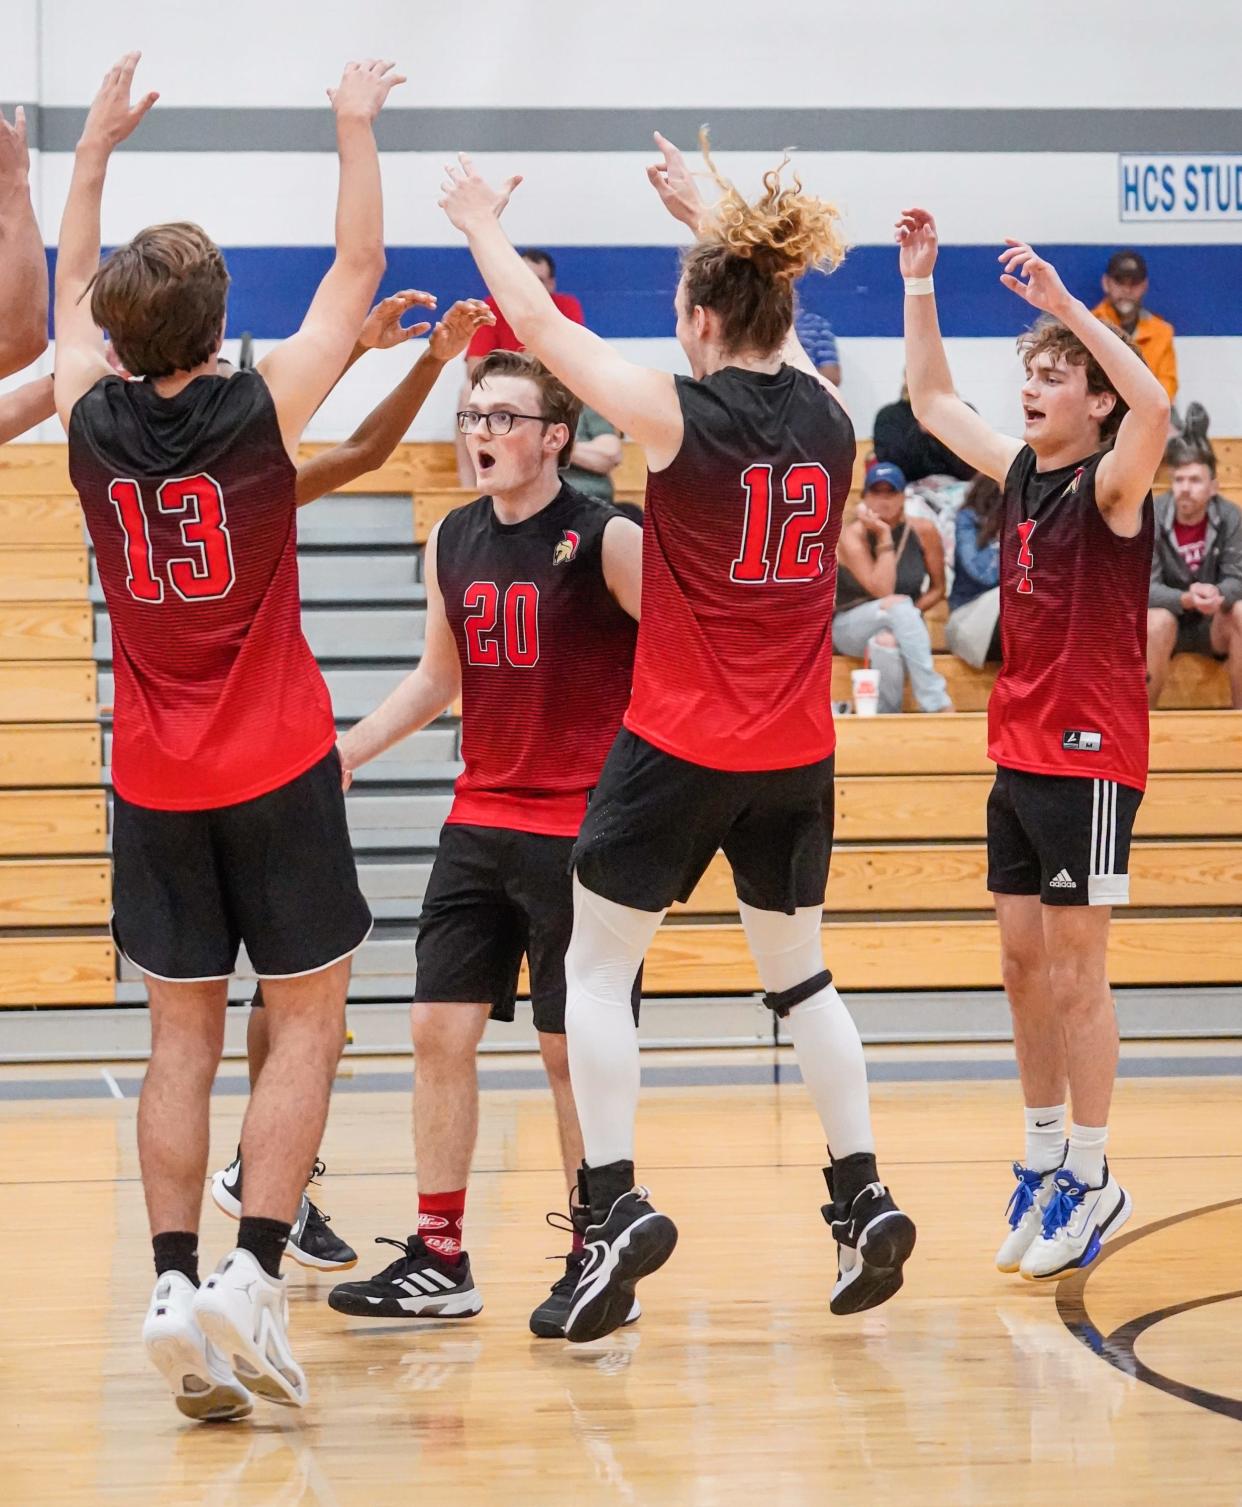 The Herron boys varsity volleyball teams celebrates a point during a game between Herron High School Achaeans and Heritage Christian High School Eagles on Tuesday, May 7, 2024, at H.C.H.S. in Indianapolis.